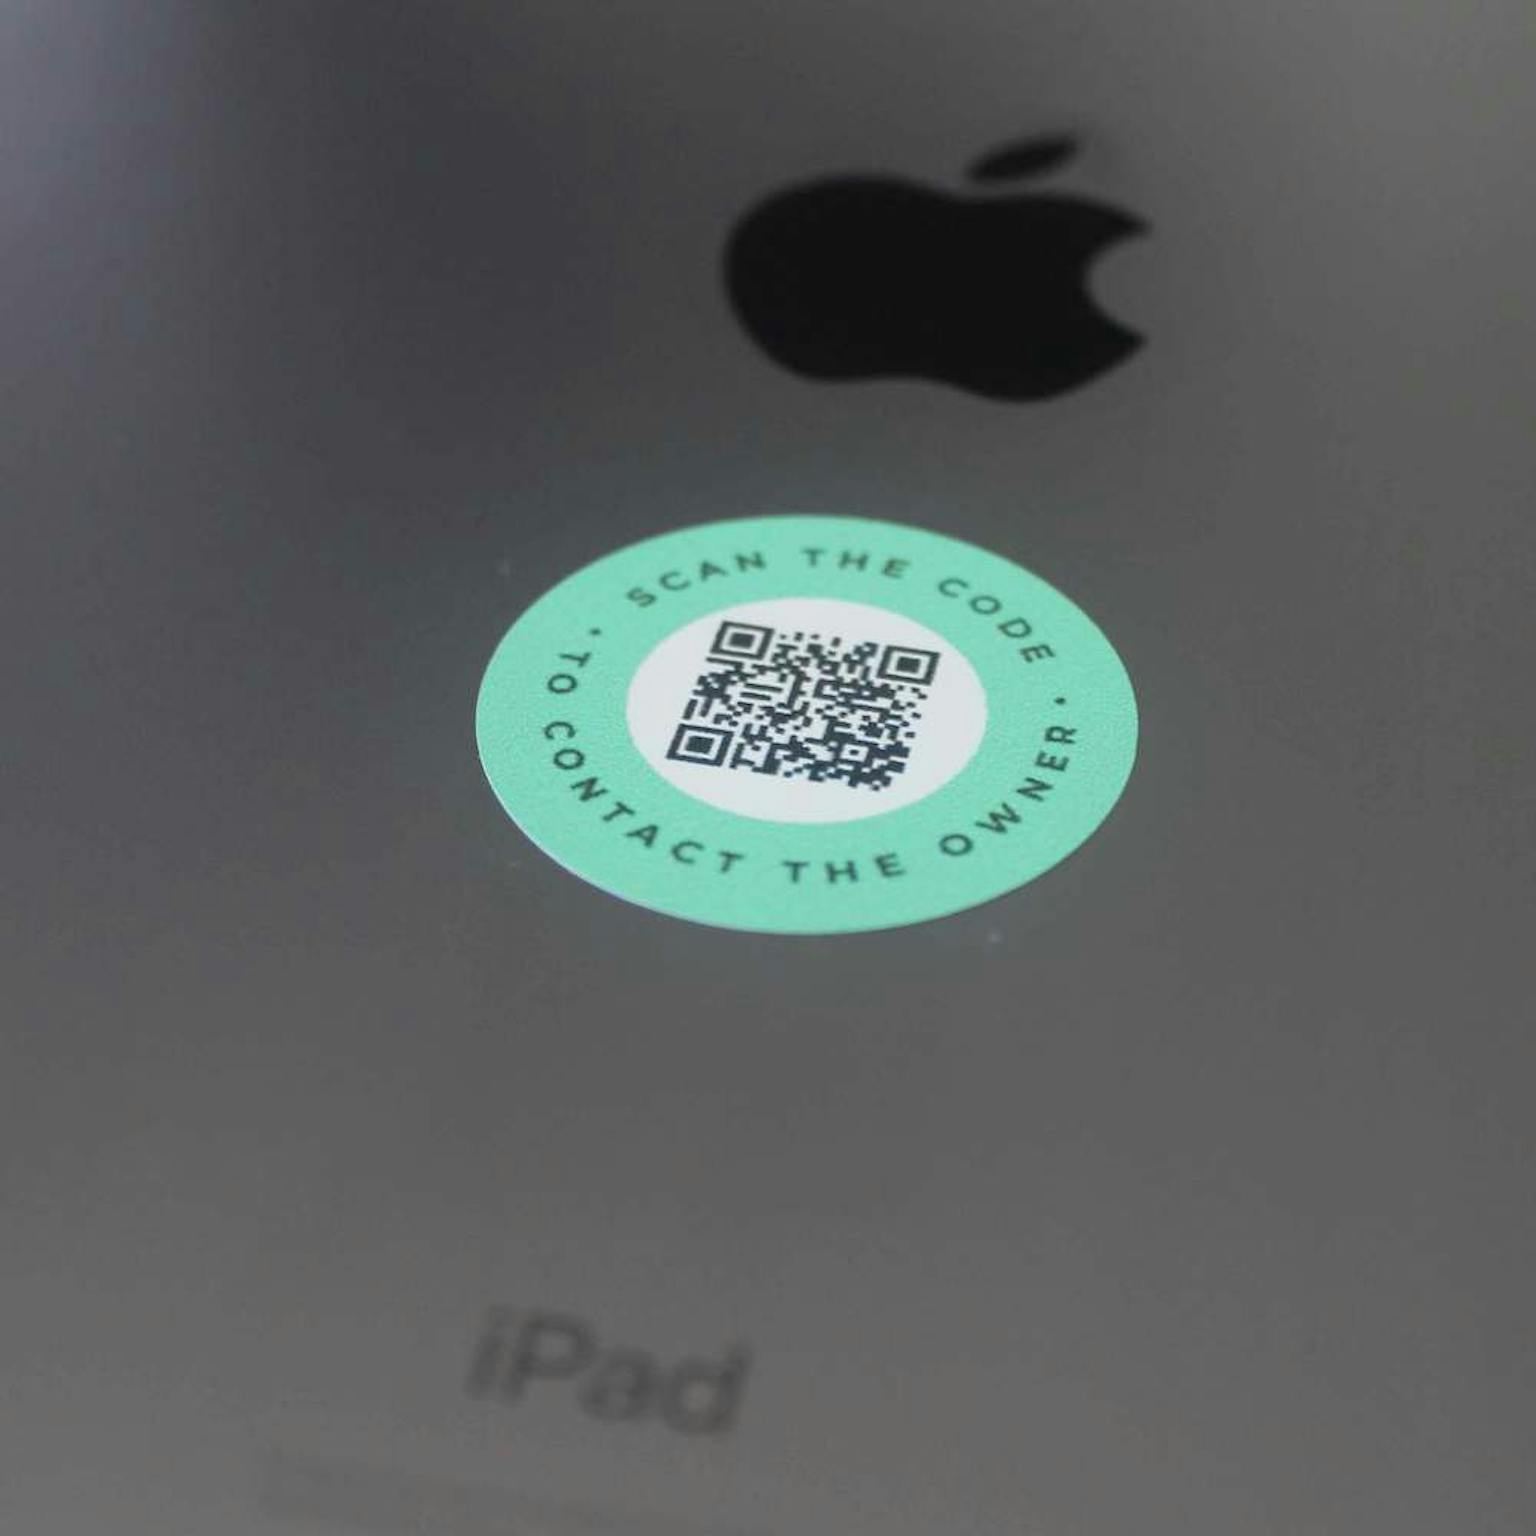 WashU student creates QR code stickers to help find lost items